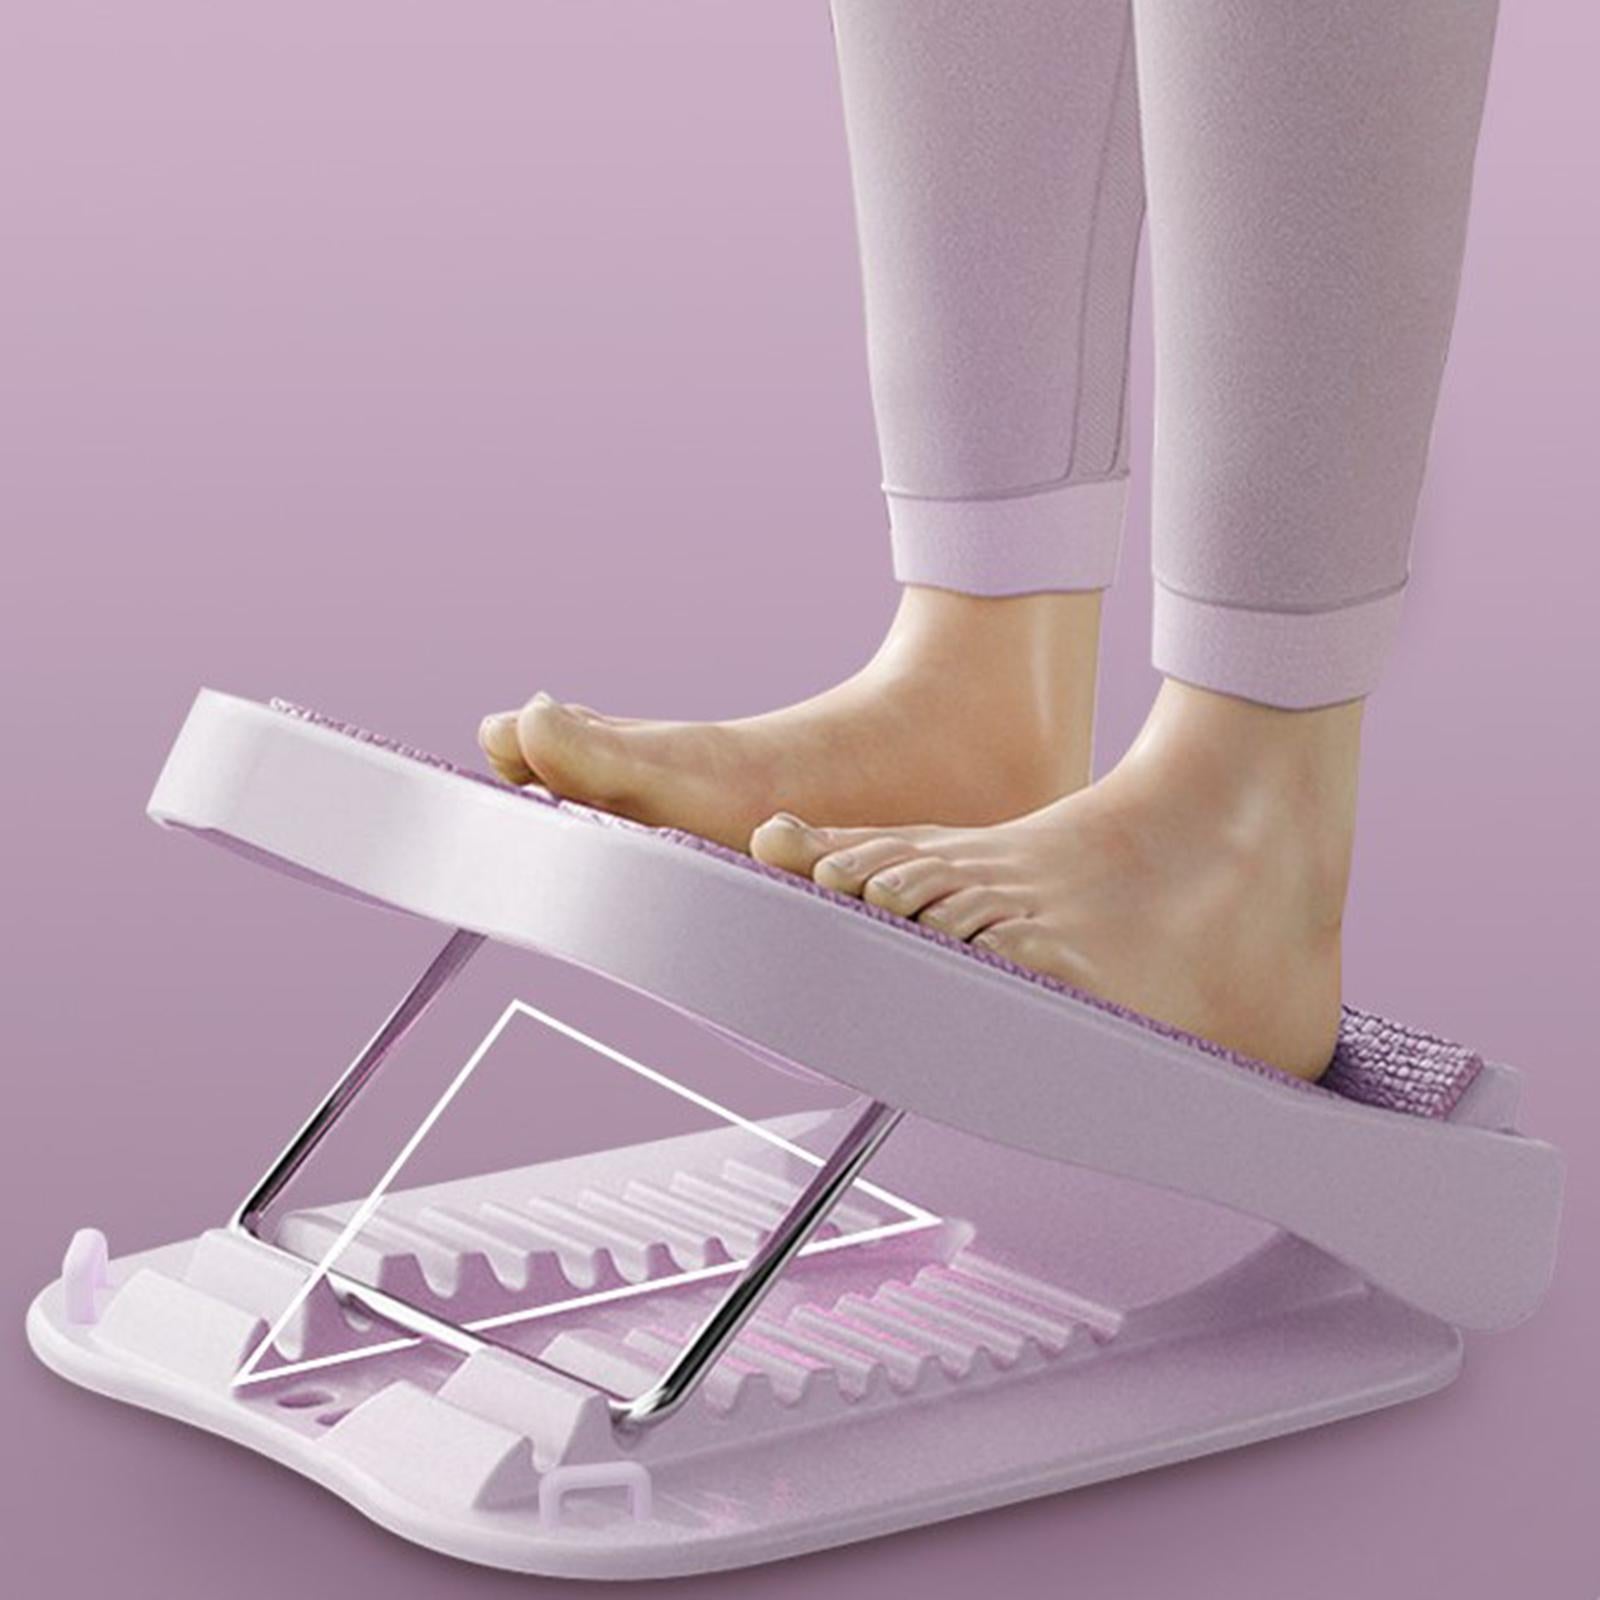 Foot Pilates - Portable Slant Board Calf Stretcher Balancing Fitness Pedal for Plantar - Personal Hour for Yoga and Meditations 